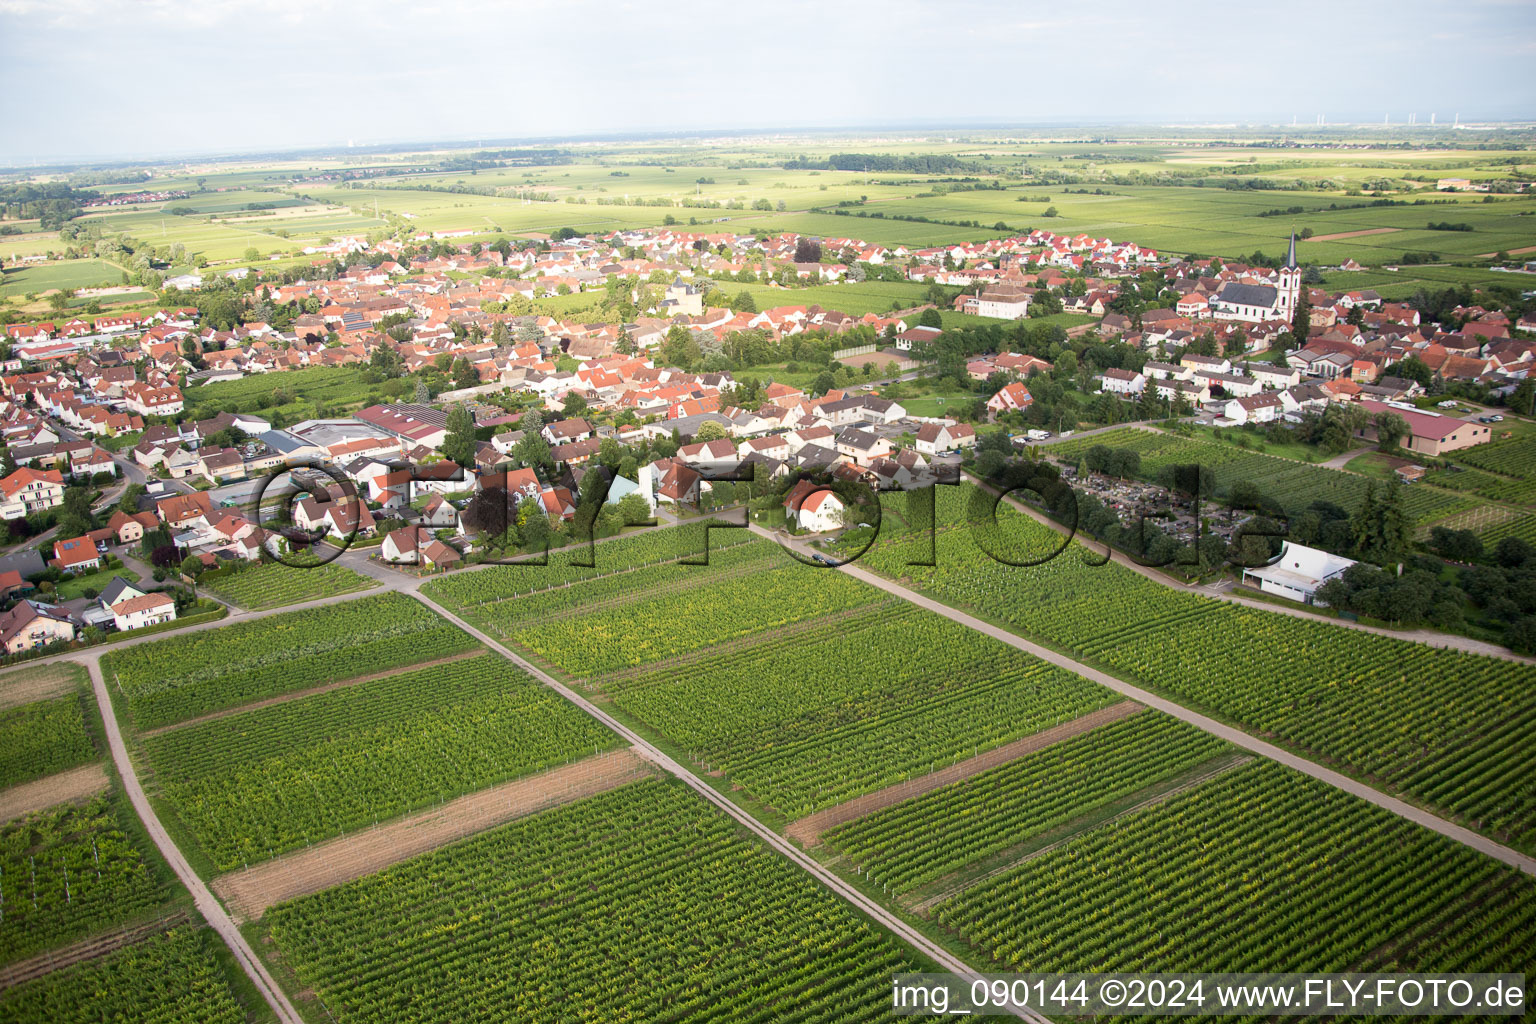 Drone recording of Edesheim in the state Rhineland-Palatinate, Germany